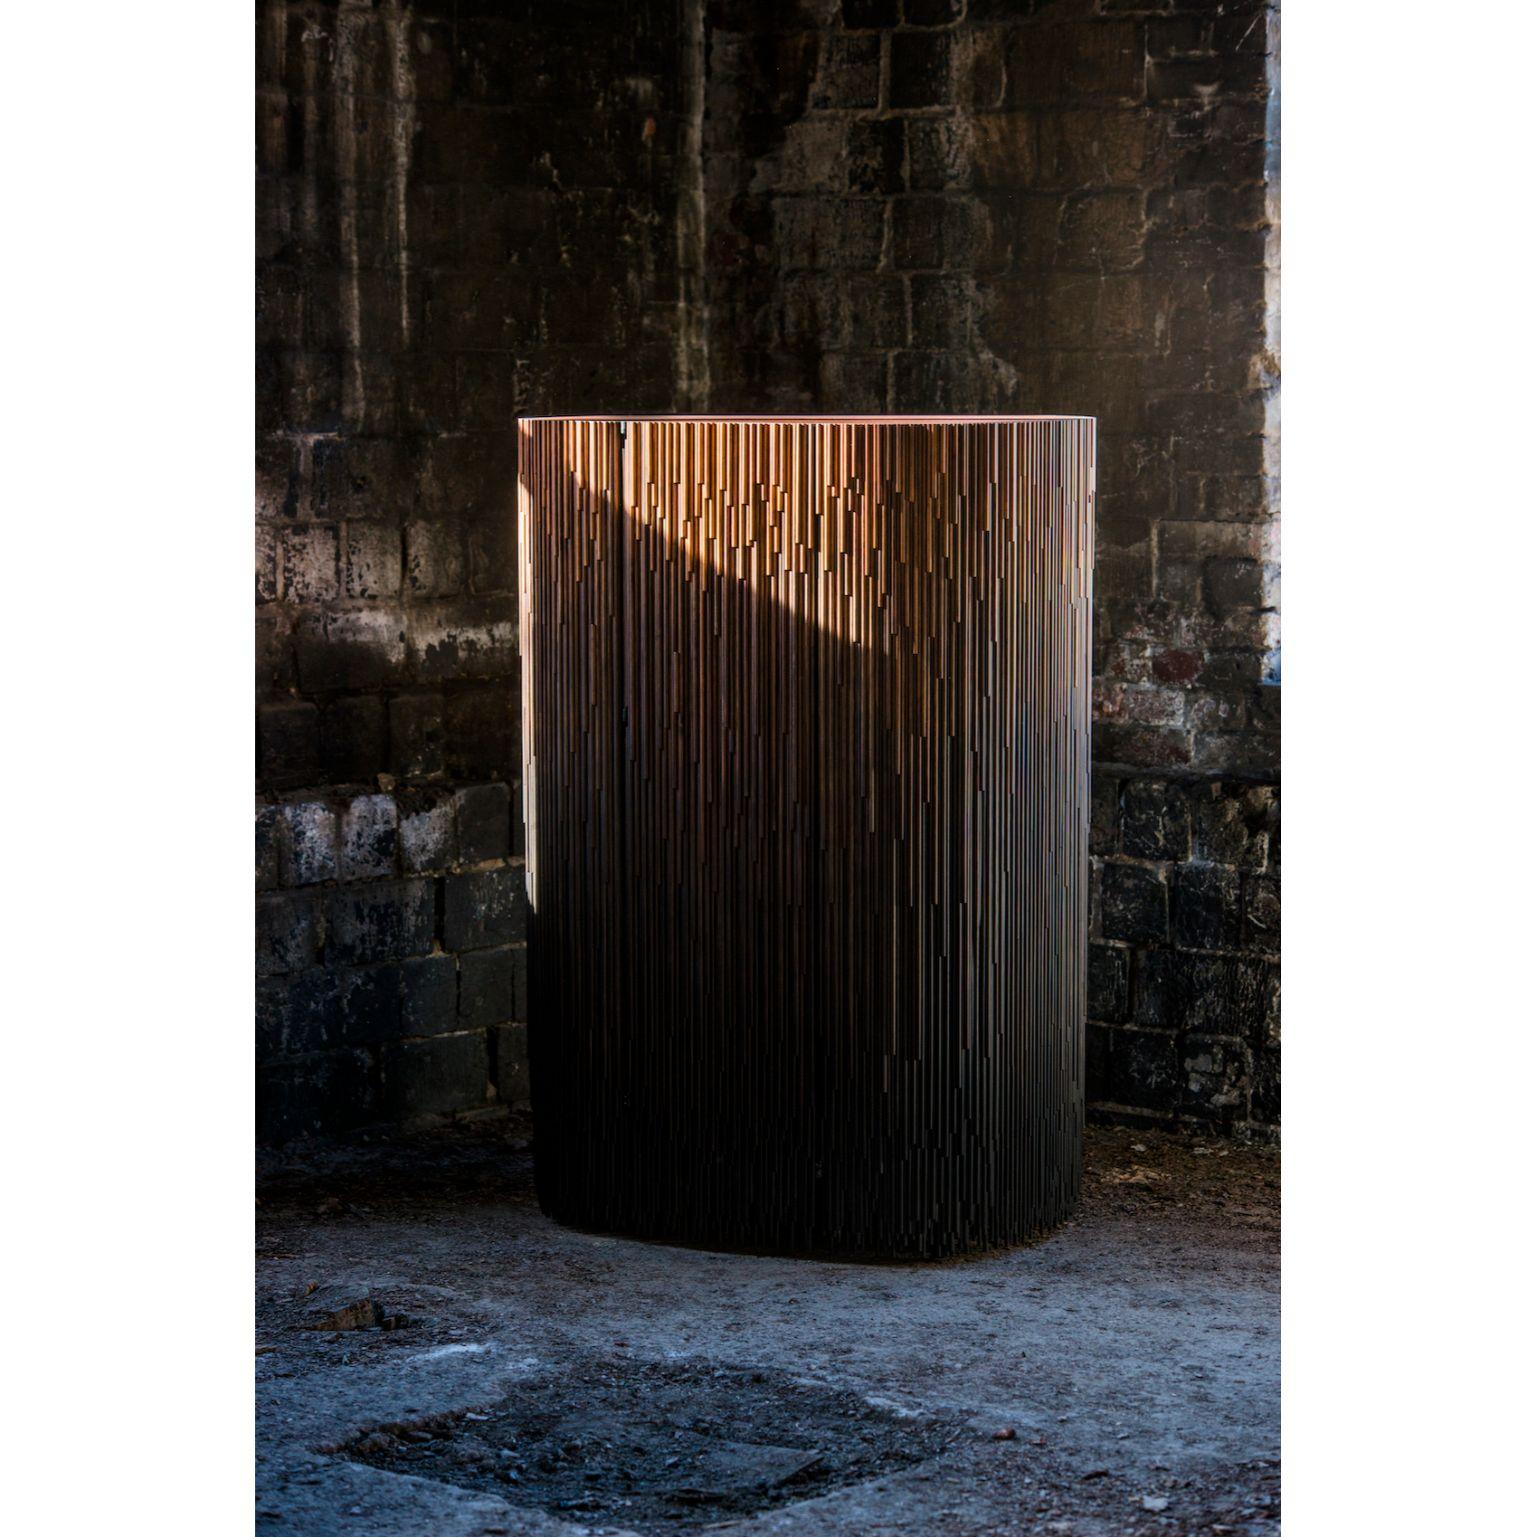 Large Melt cabinet by Antrei Hartikainen
Materials: Stained and lacquered or untreated pine
Dimensions: W 95 x D 73 x H 140 cm

In the Melt cabinets industrially treated pine transforms into an unique art composition. The cabinet has been